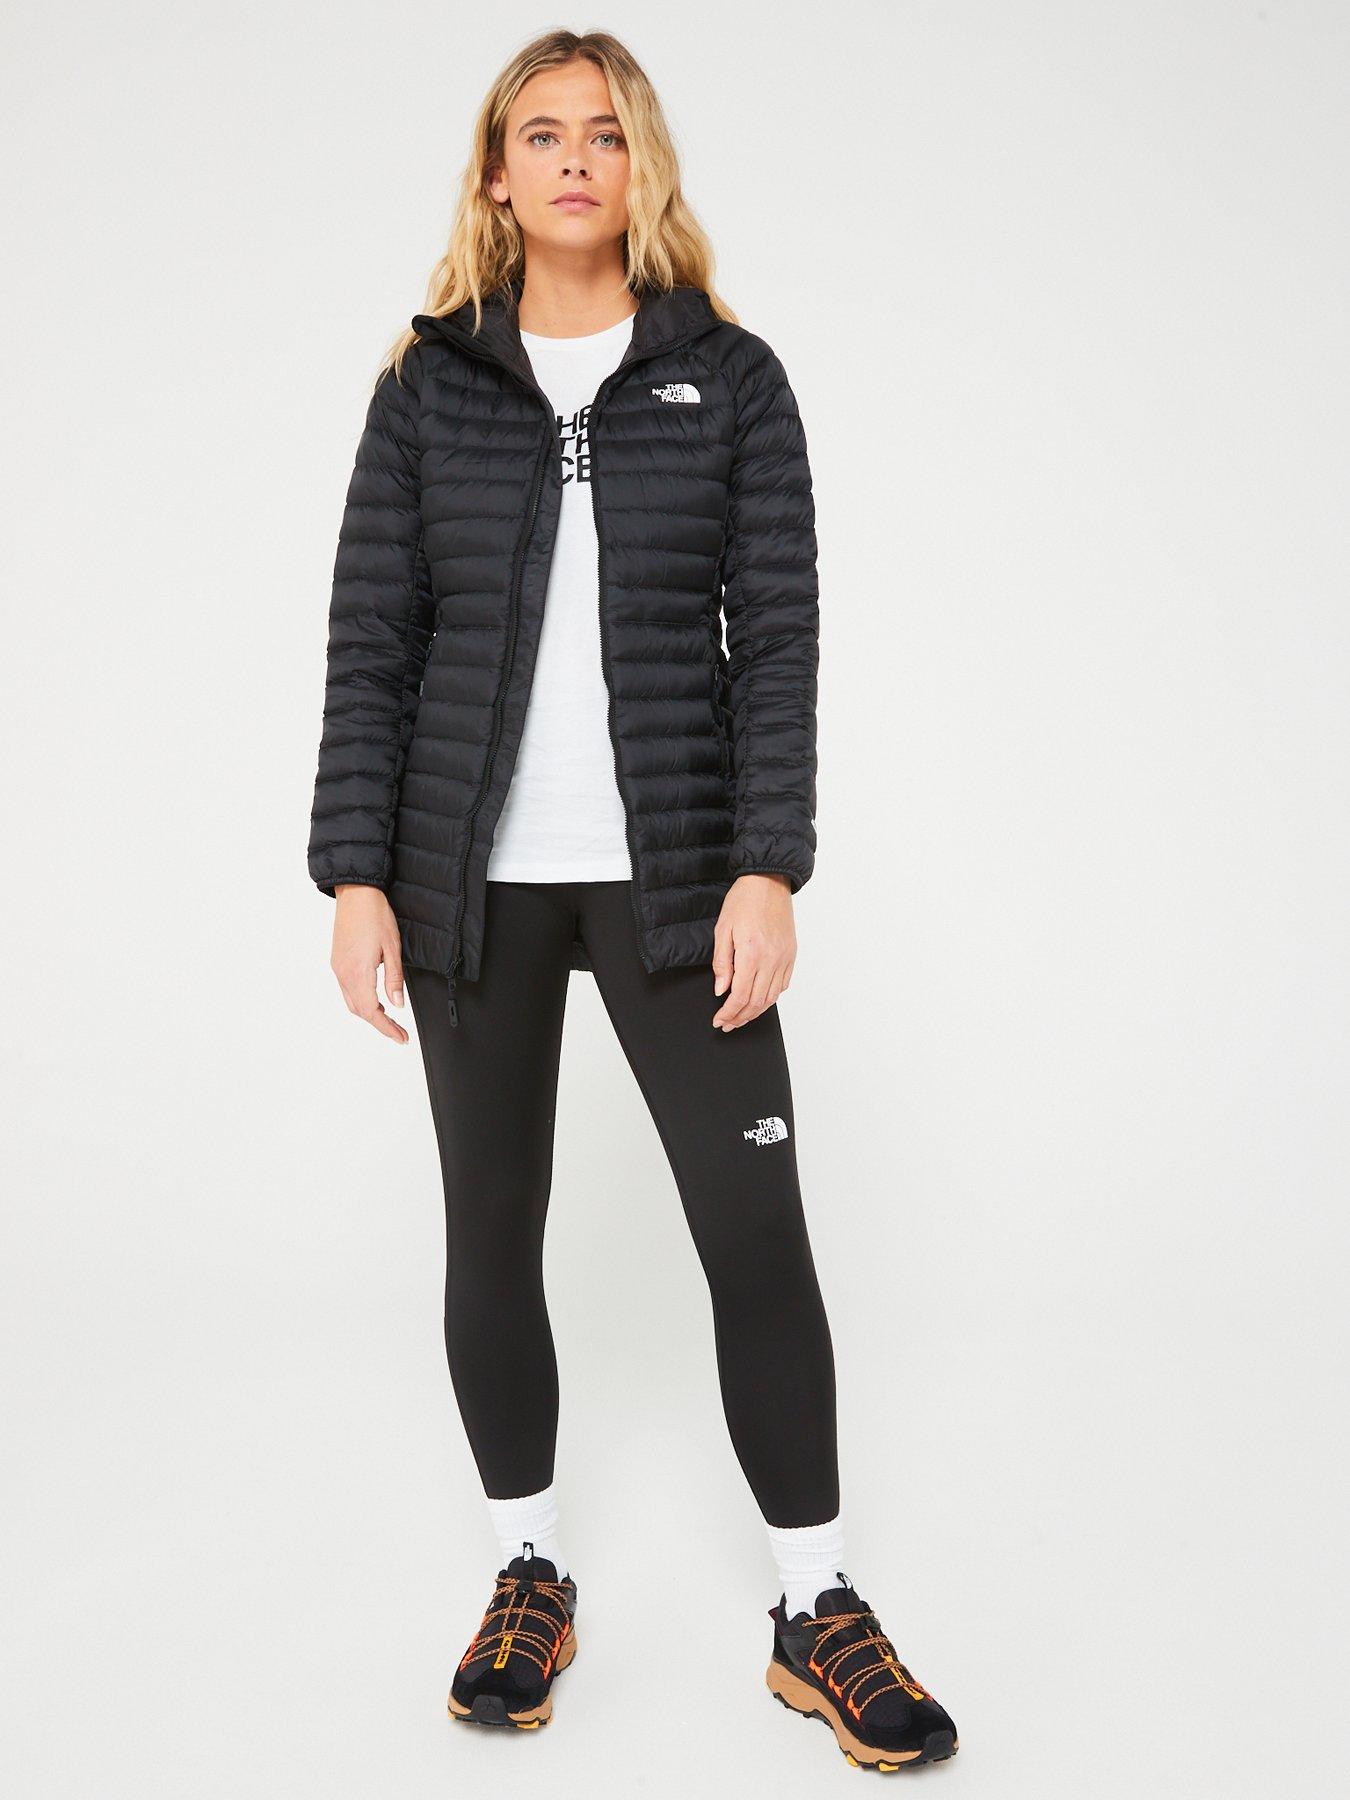 THE NORTH FACE Women's NeTrevail Parka Jacket - Black | very.co.uk